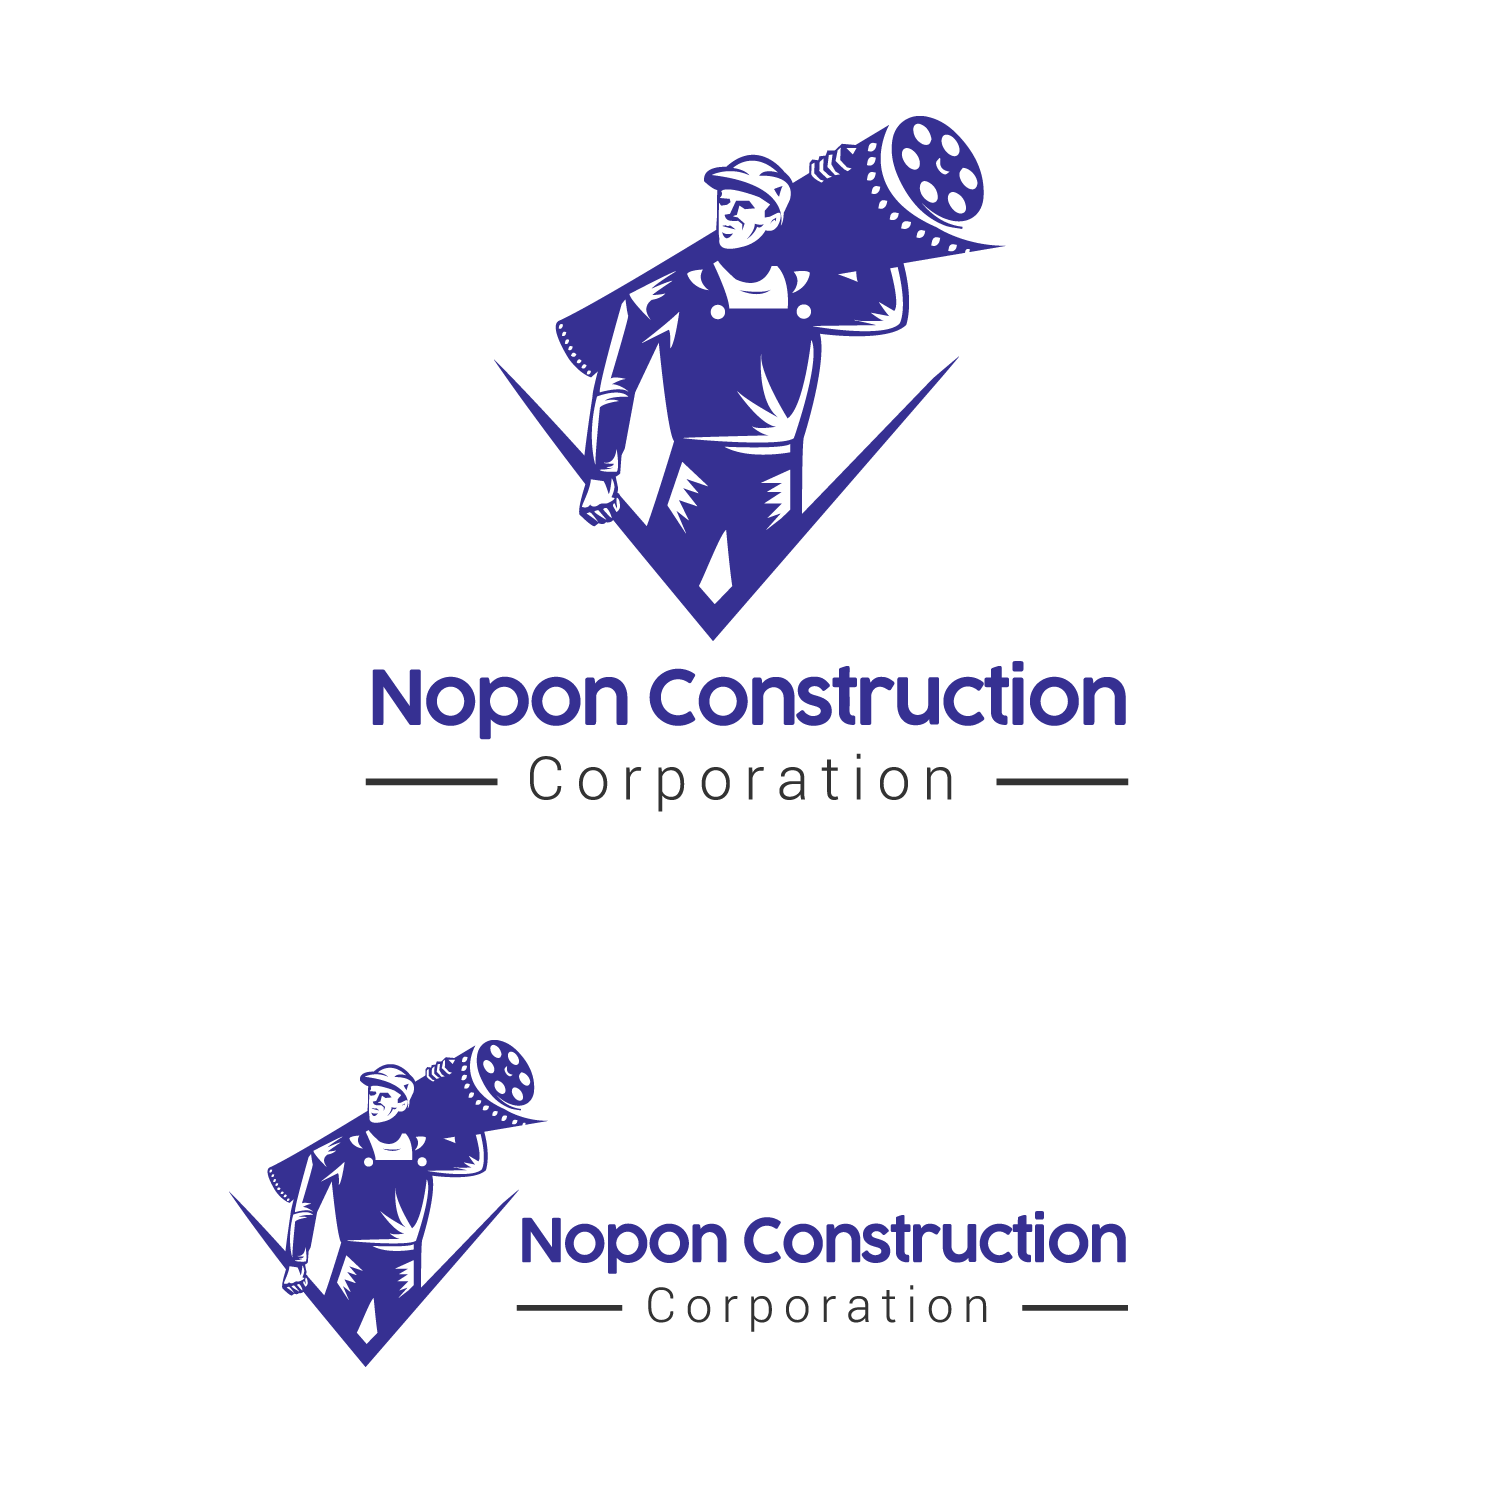 Contruction Logo - 55 Construction Logo Designs For Architects and Builders